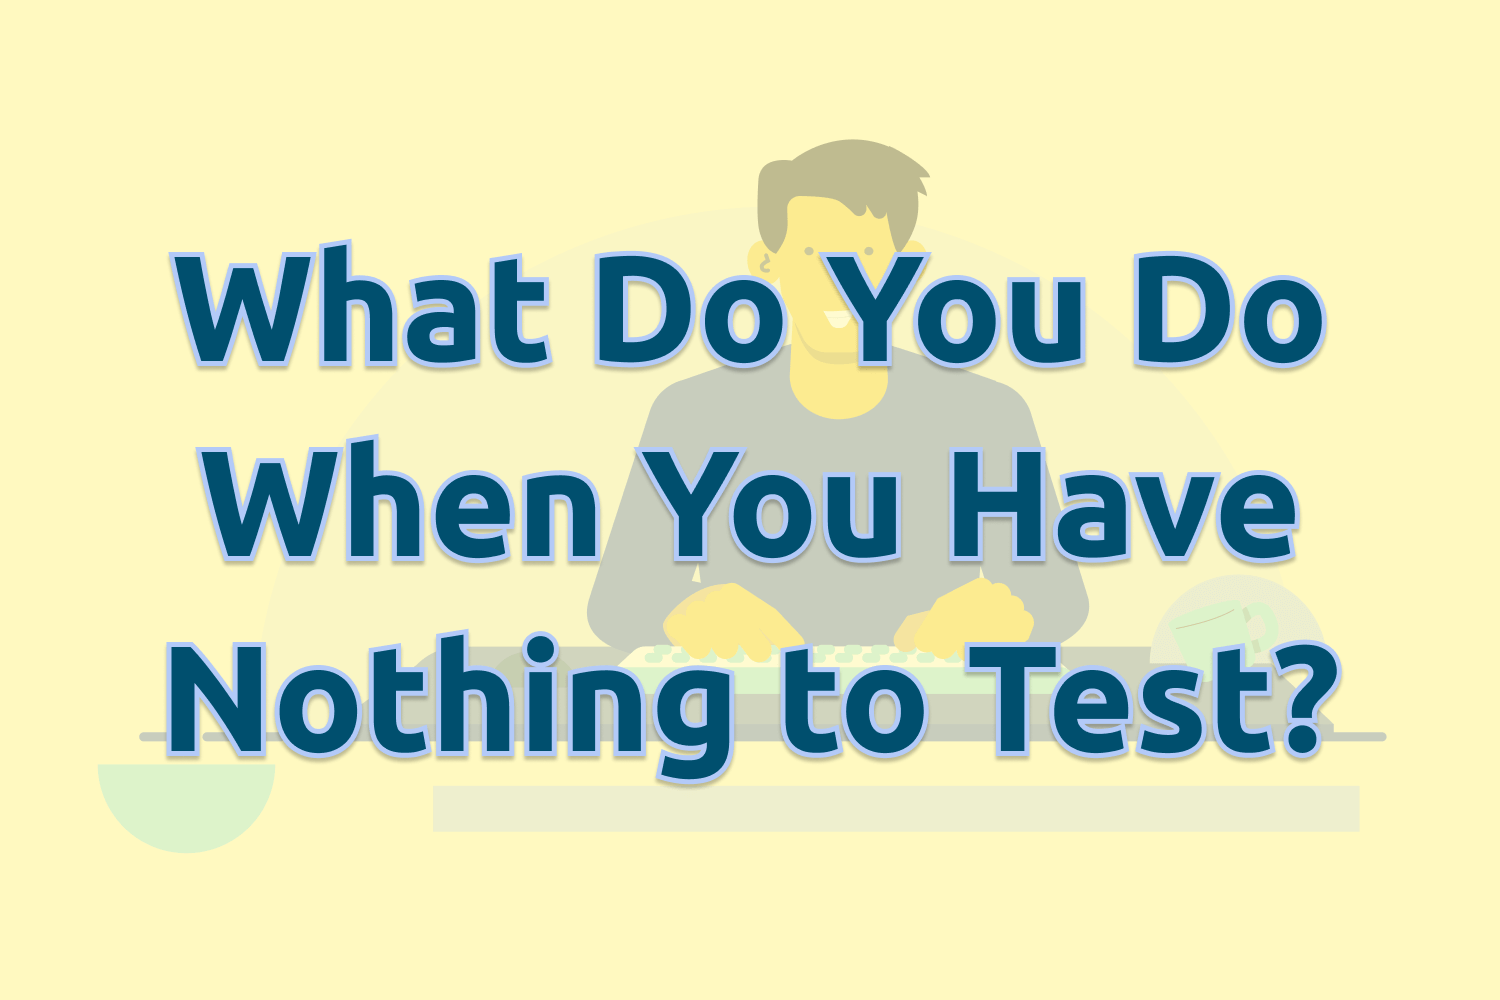 What Do You Do When You Have Nothing to Test?